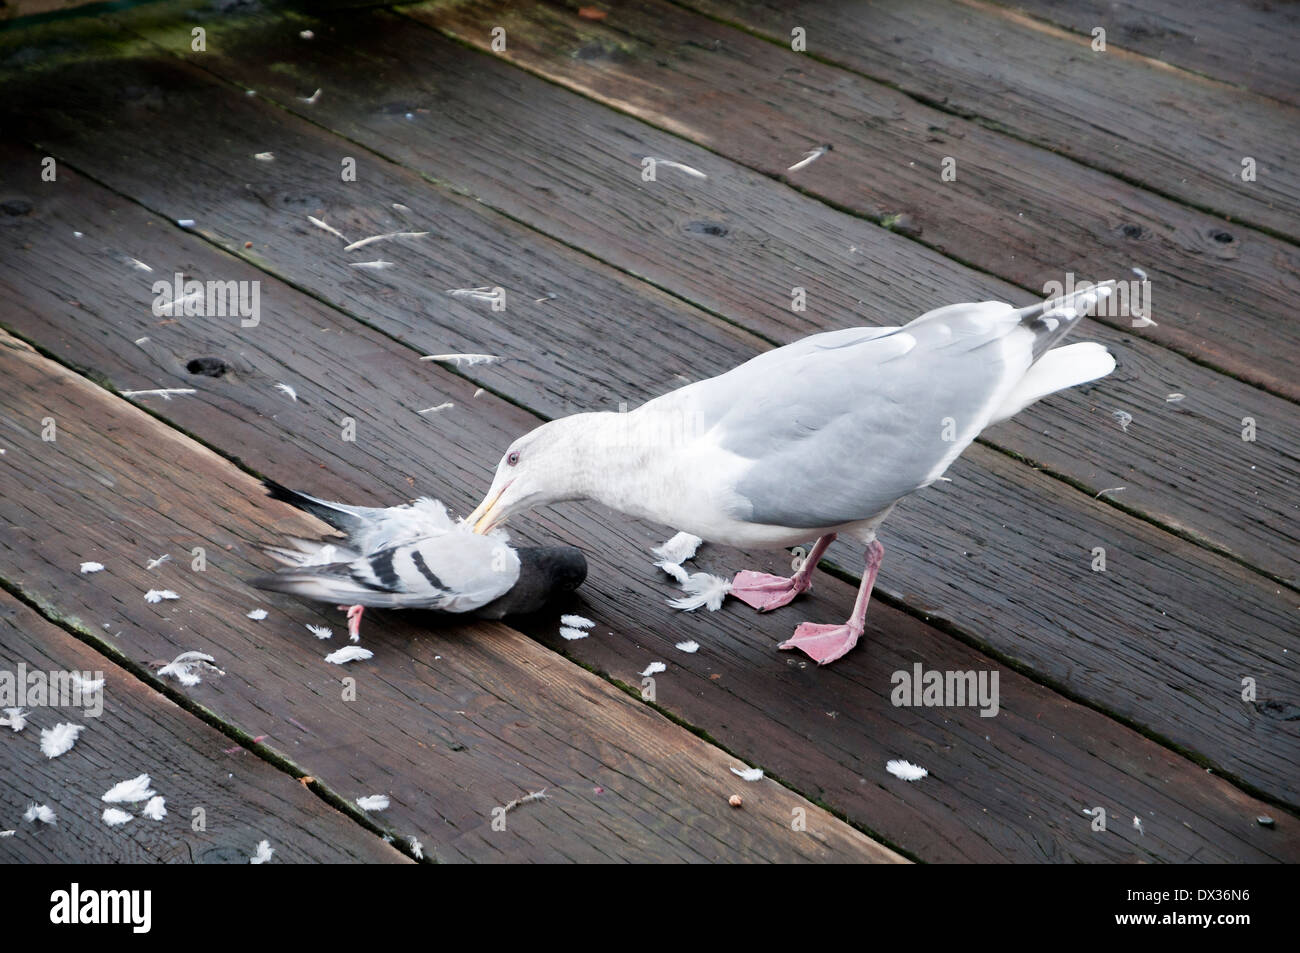 Gull pecking and eating dead pigeon. Stock Photo